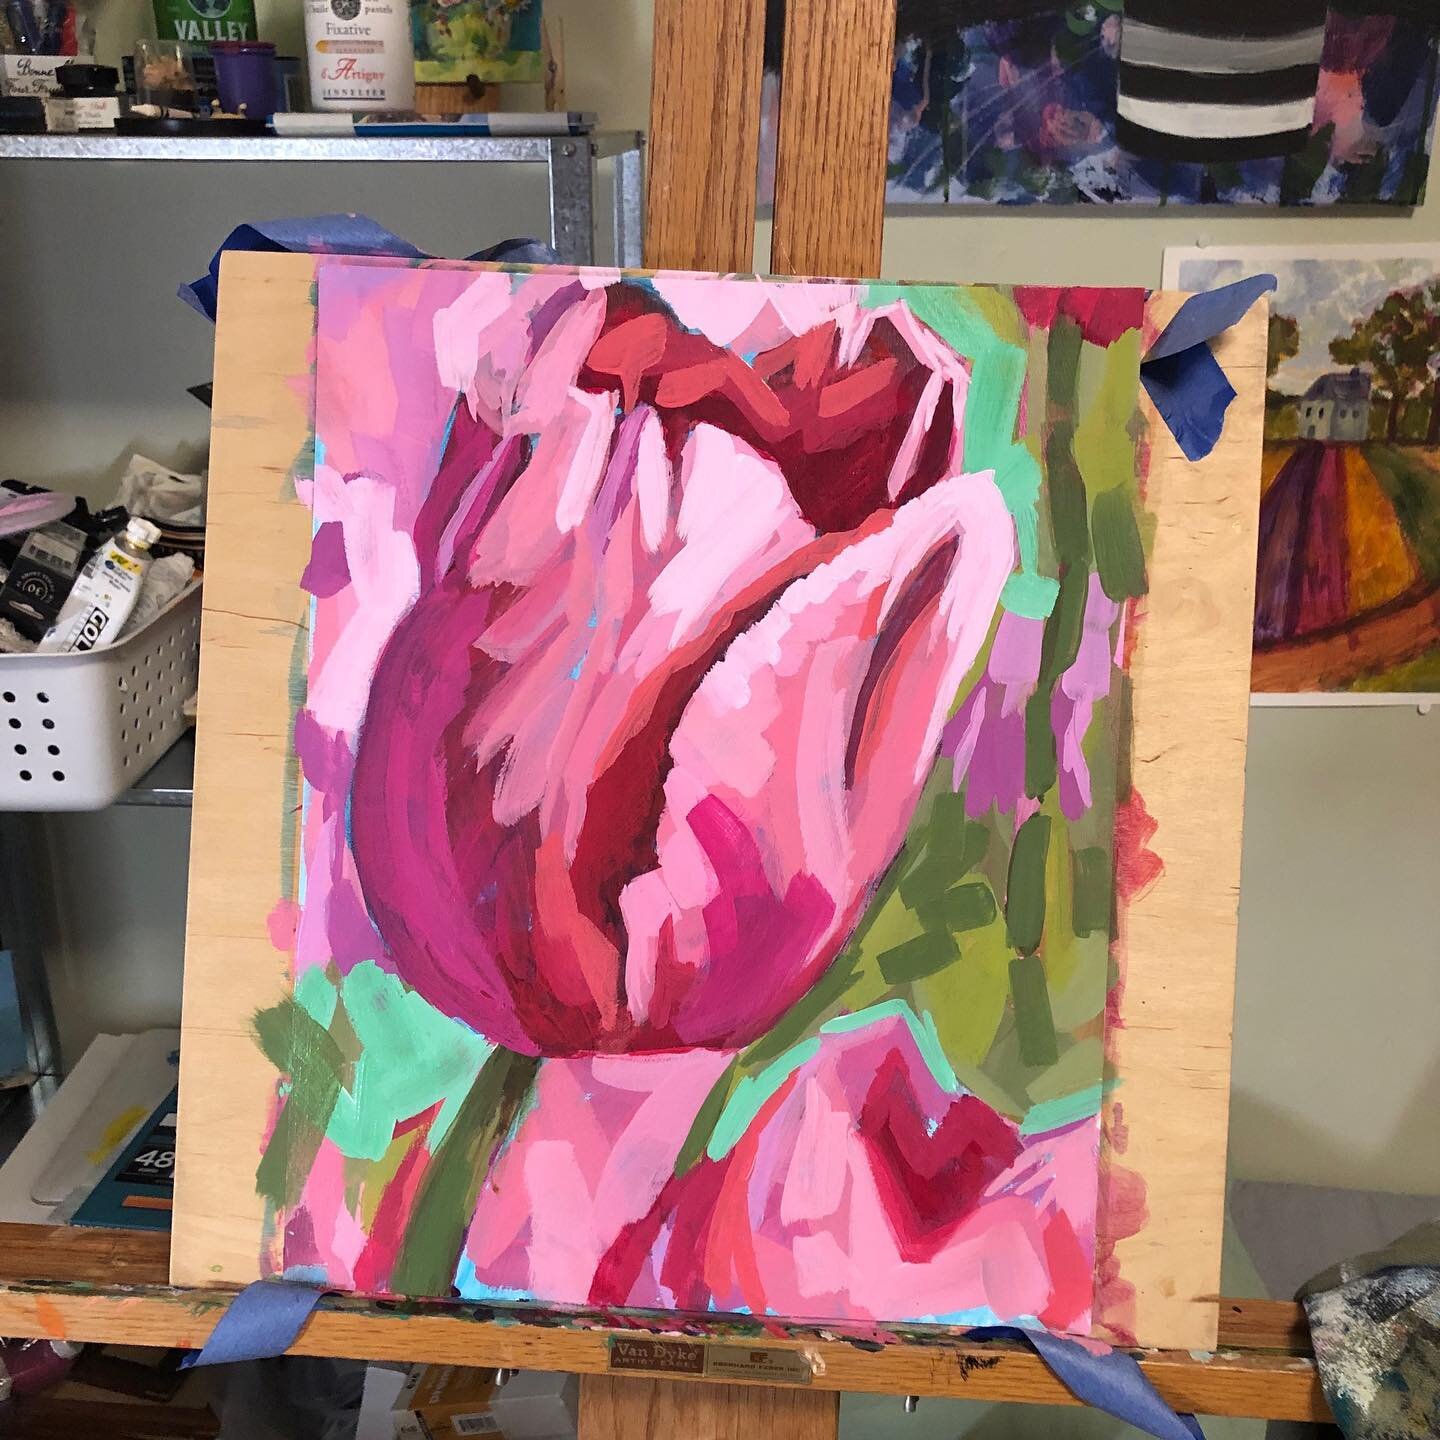 What&rsquo;s scary? Learning something new!

I&rsquo;ve taken on the project of learning a new way to paint and use new supplies. It&rsquo;s incredibly challenging, but I&rsquo;m excited about the possibilities if I figure it out. 

When was the last